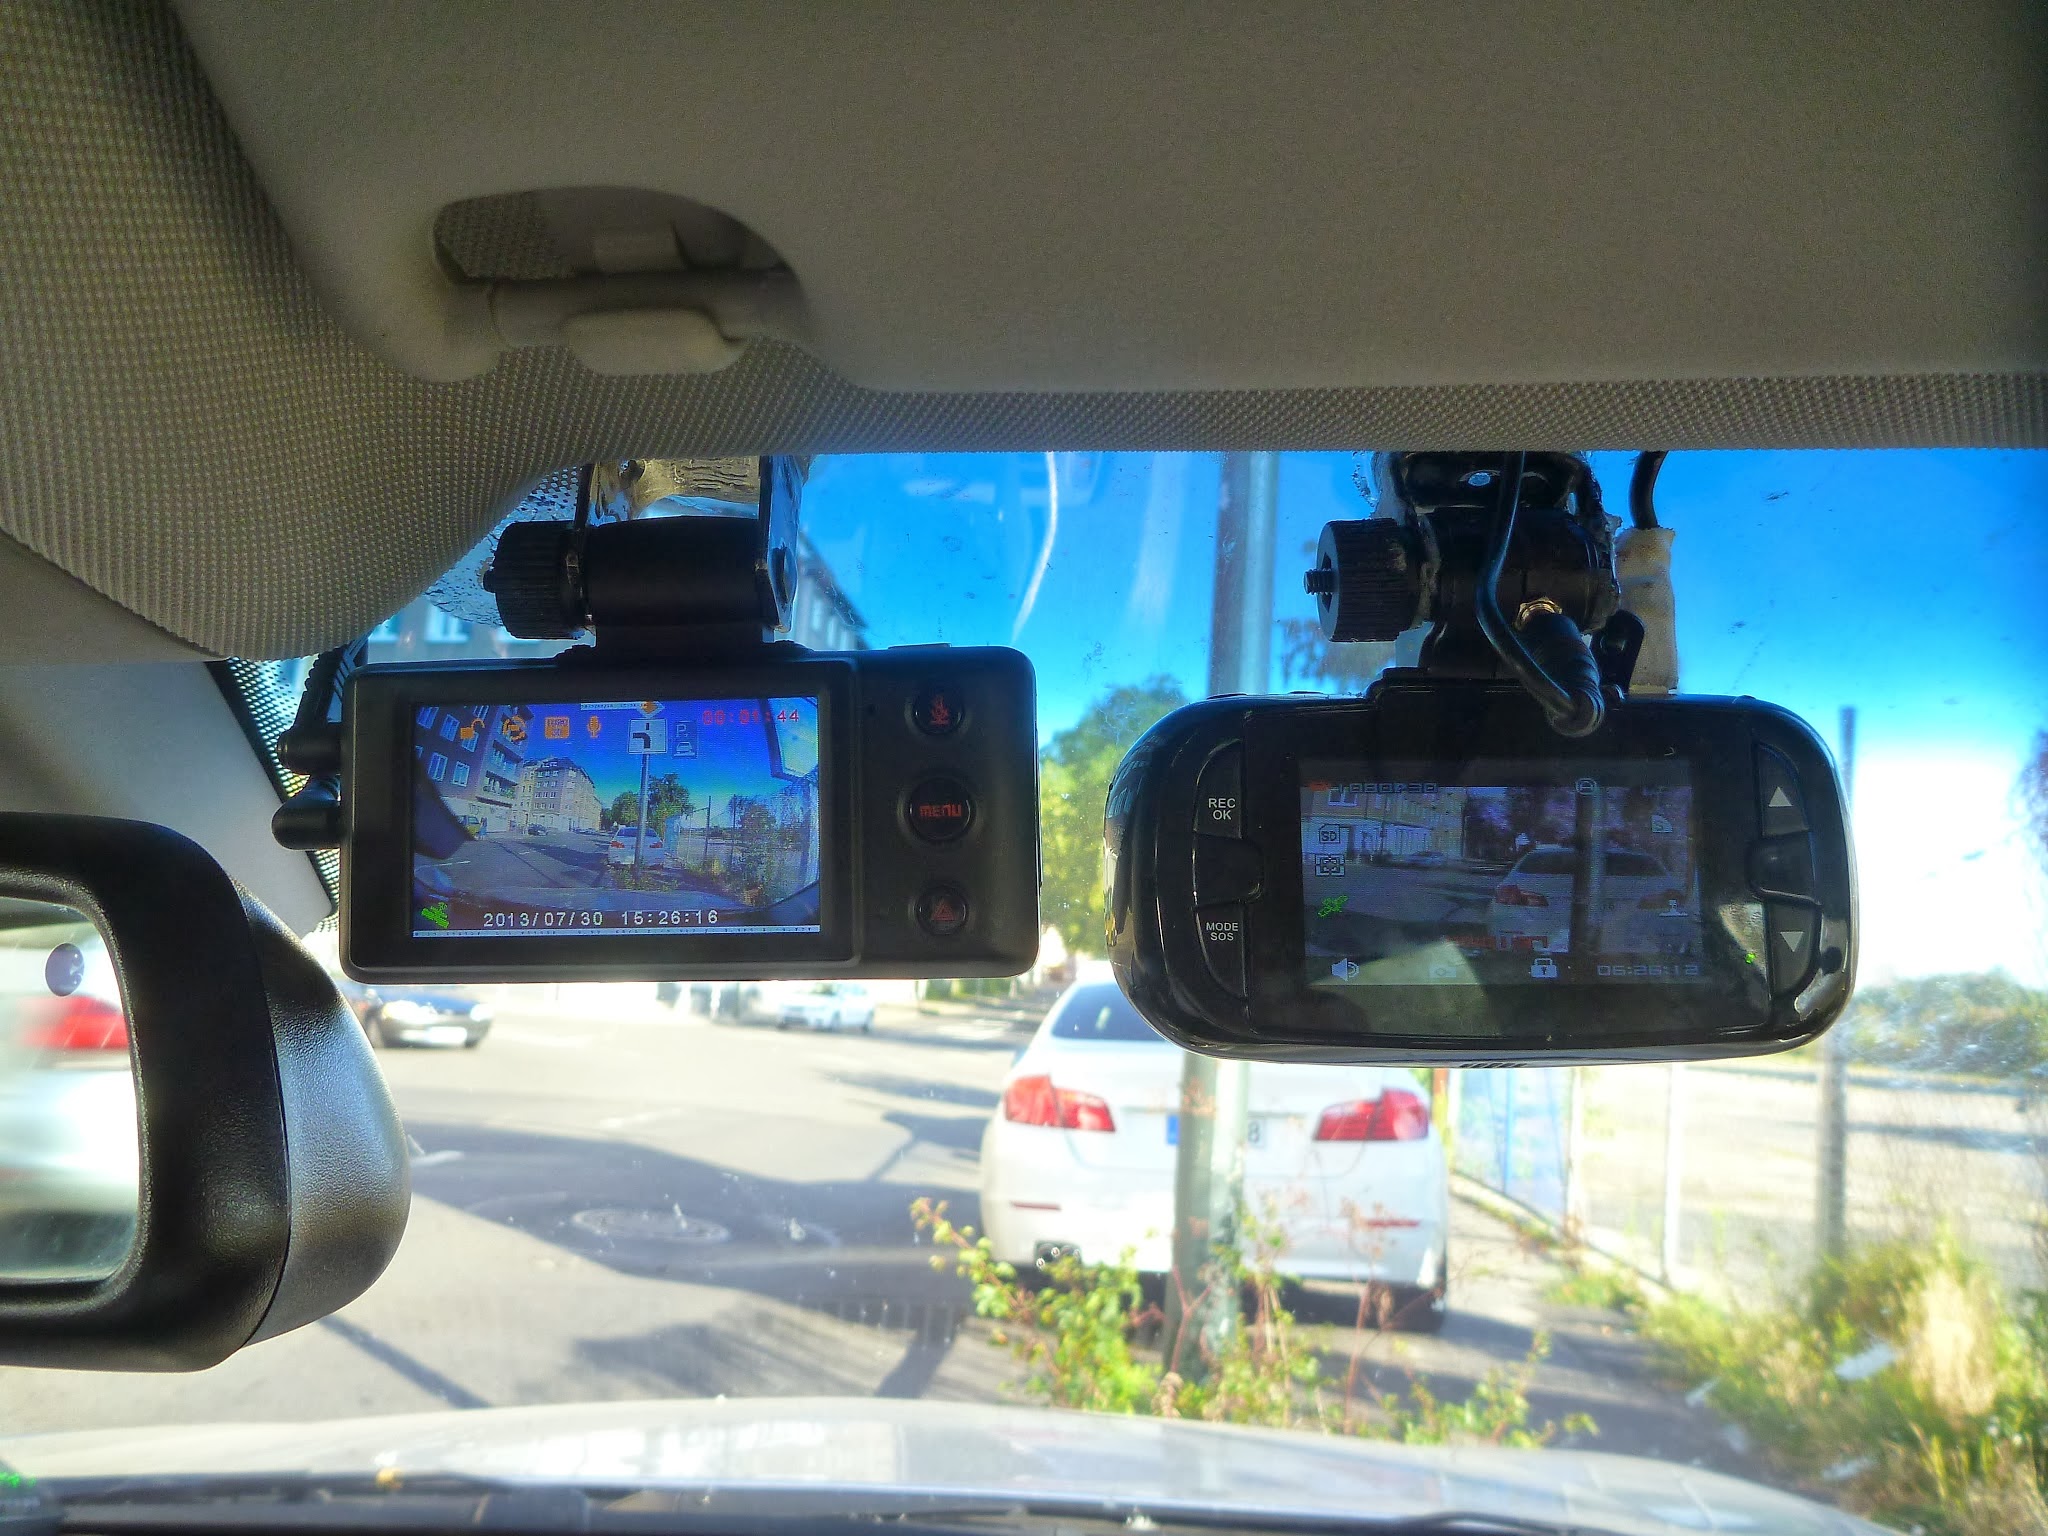 German supreme court cites our research in its ruling on dashcam